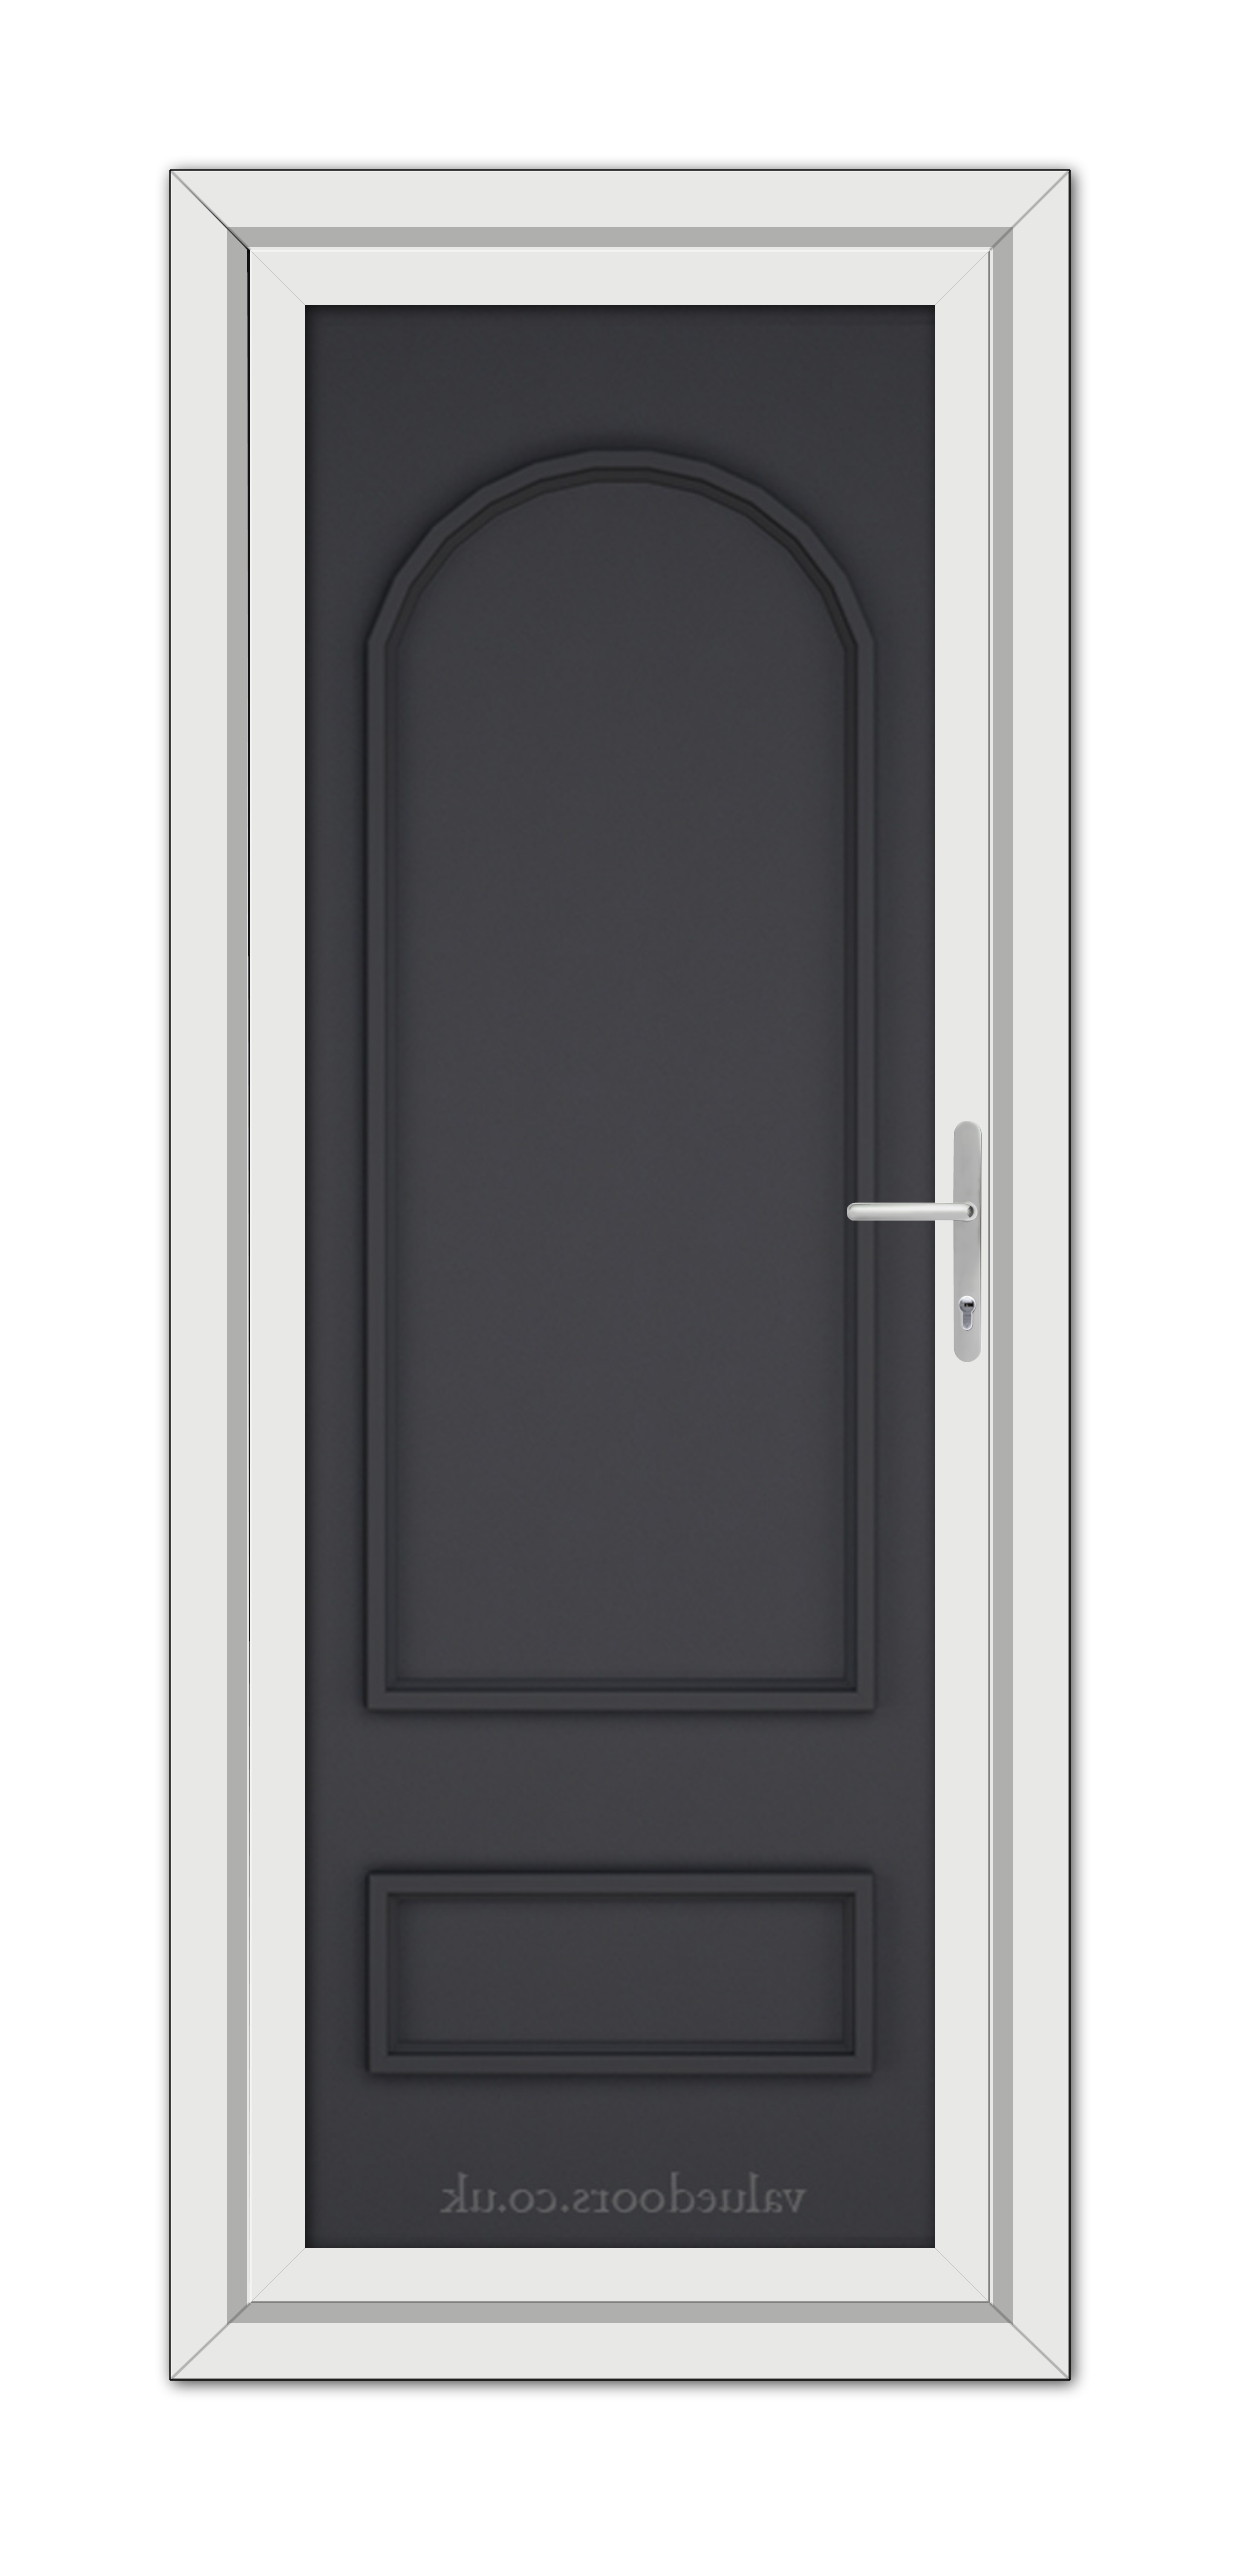 A modern Grey Canterbury Solid uPVC Door with a white frame and a metallic handle, featuring a vertical arched design at the top.